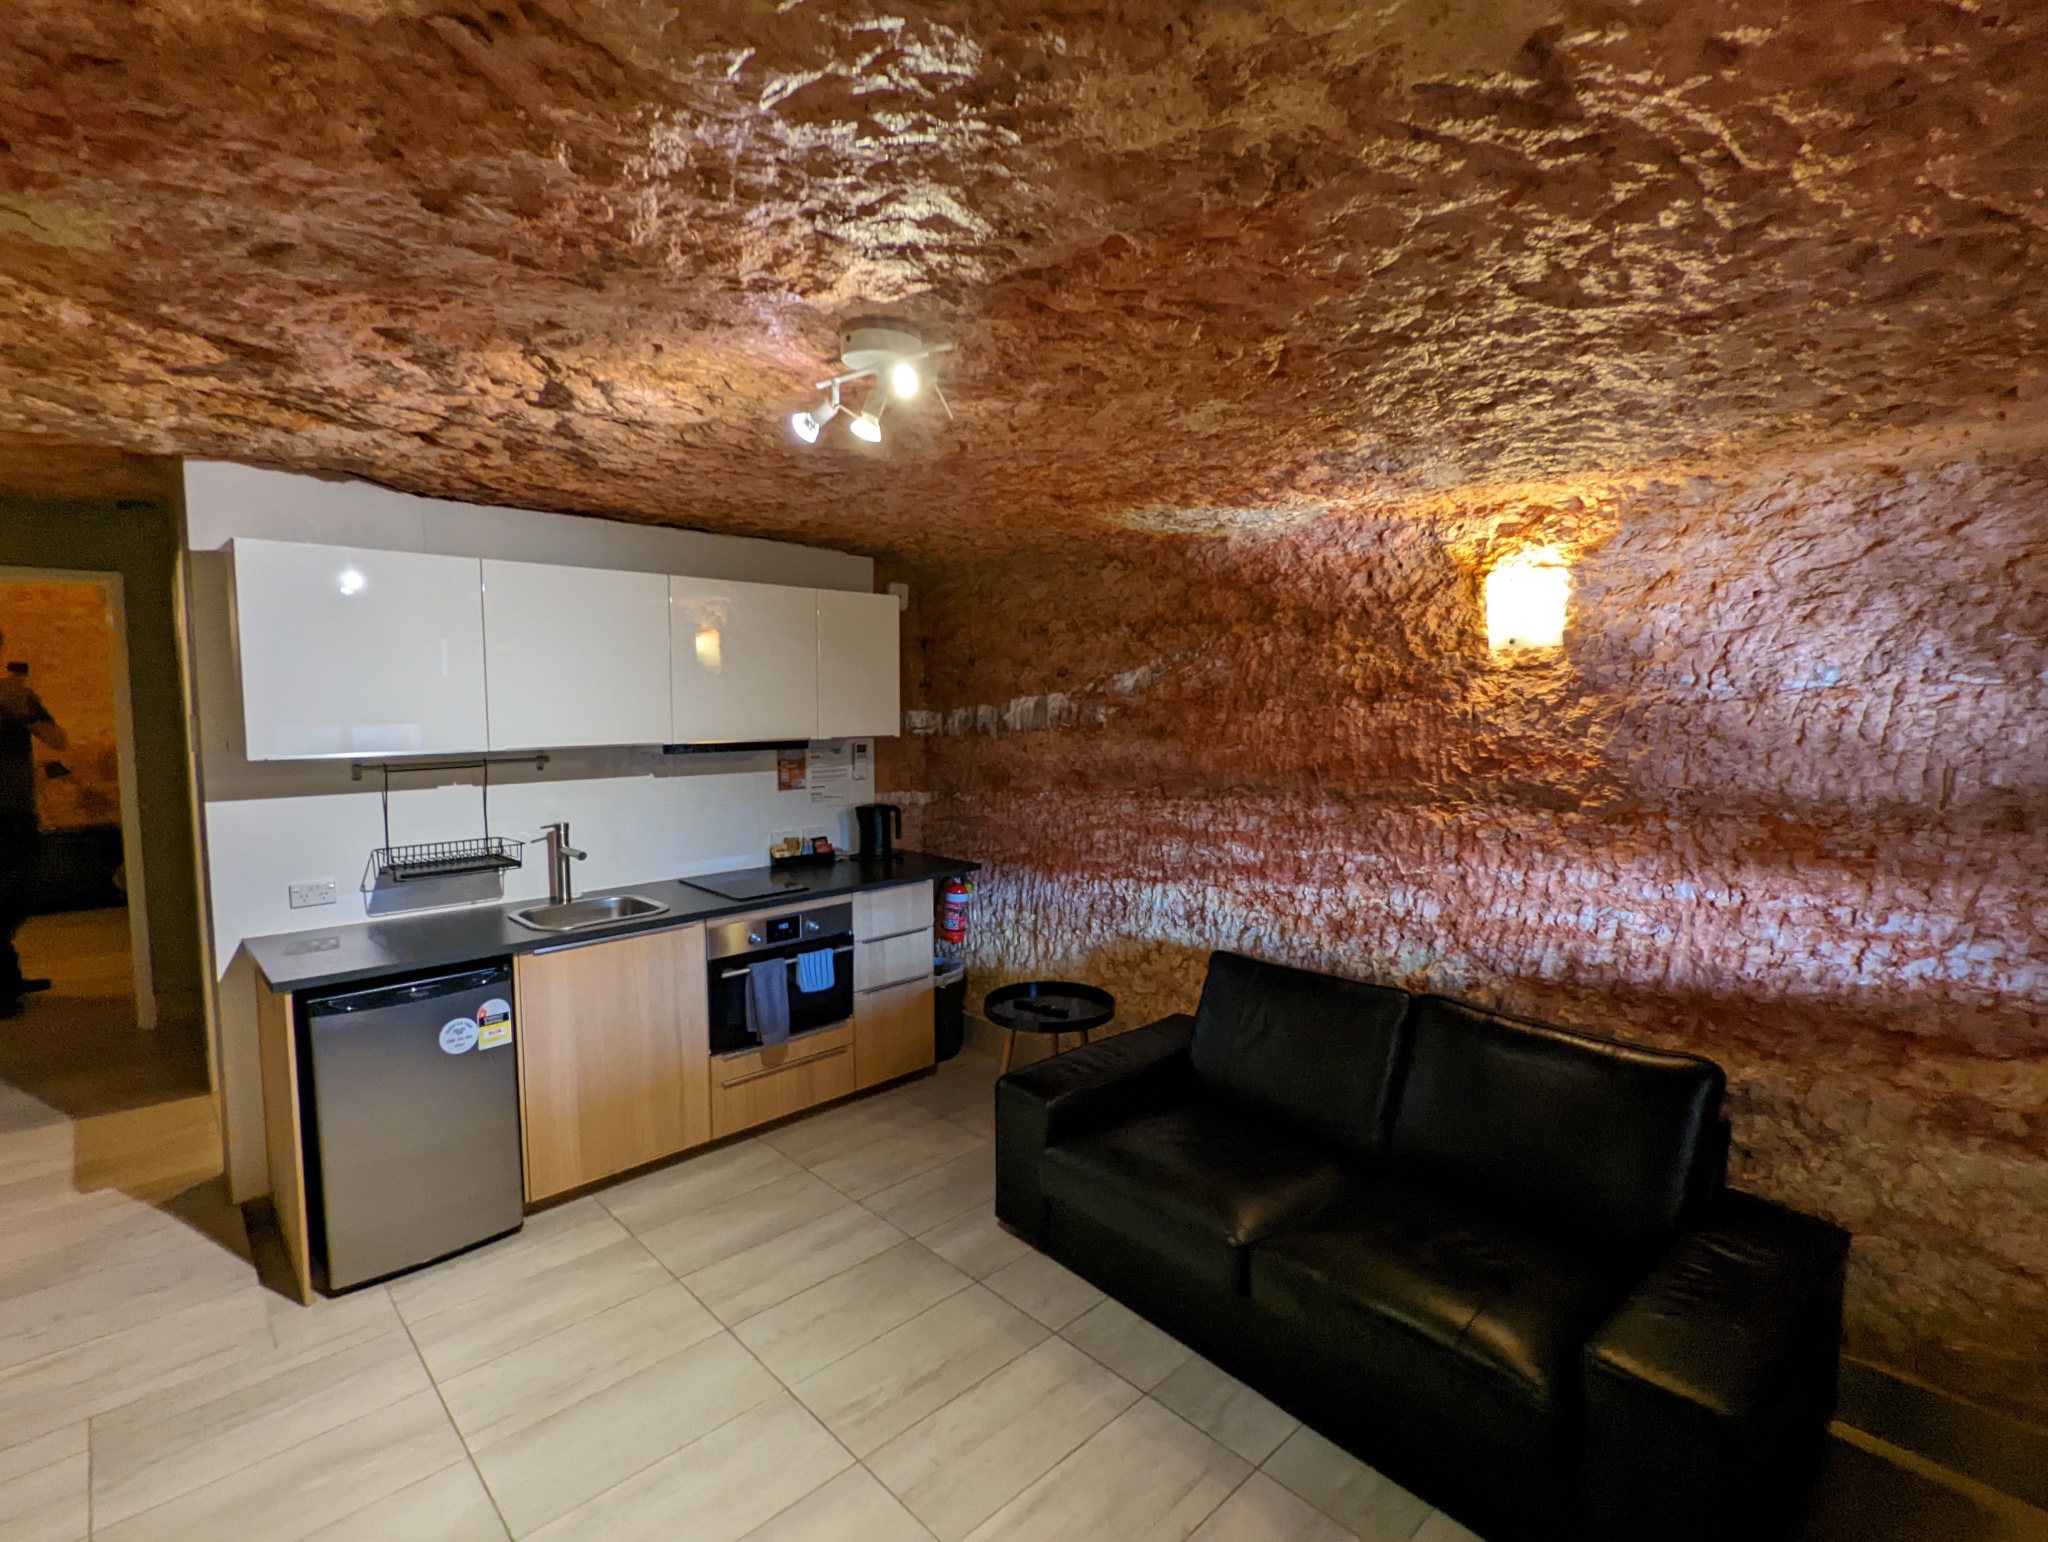 Coober Pedy hotel room which is built into the rock underground